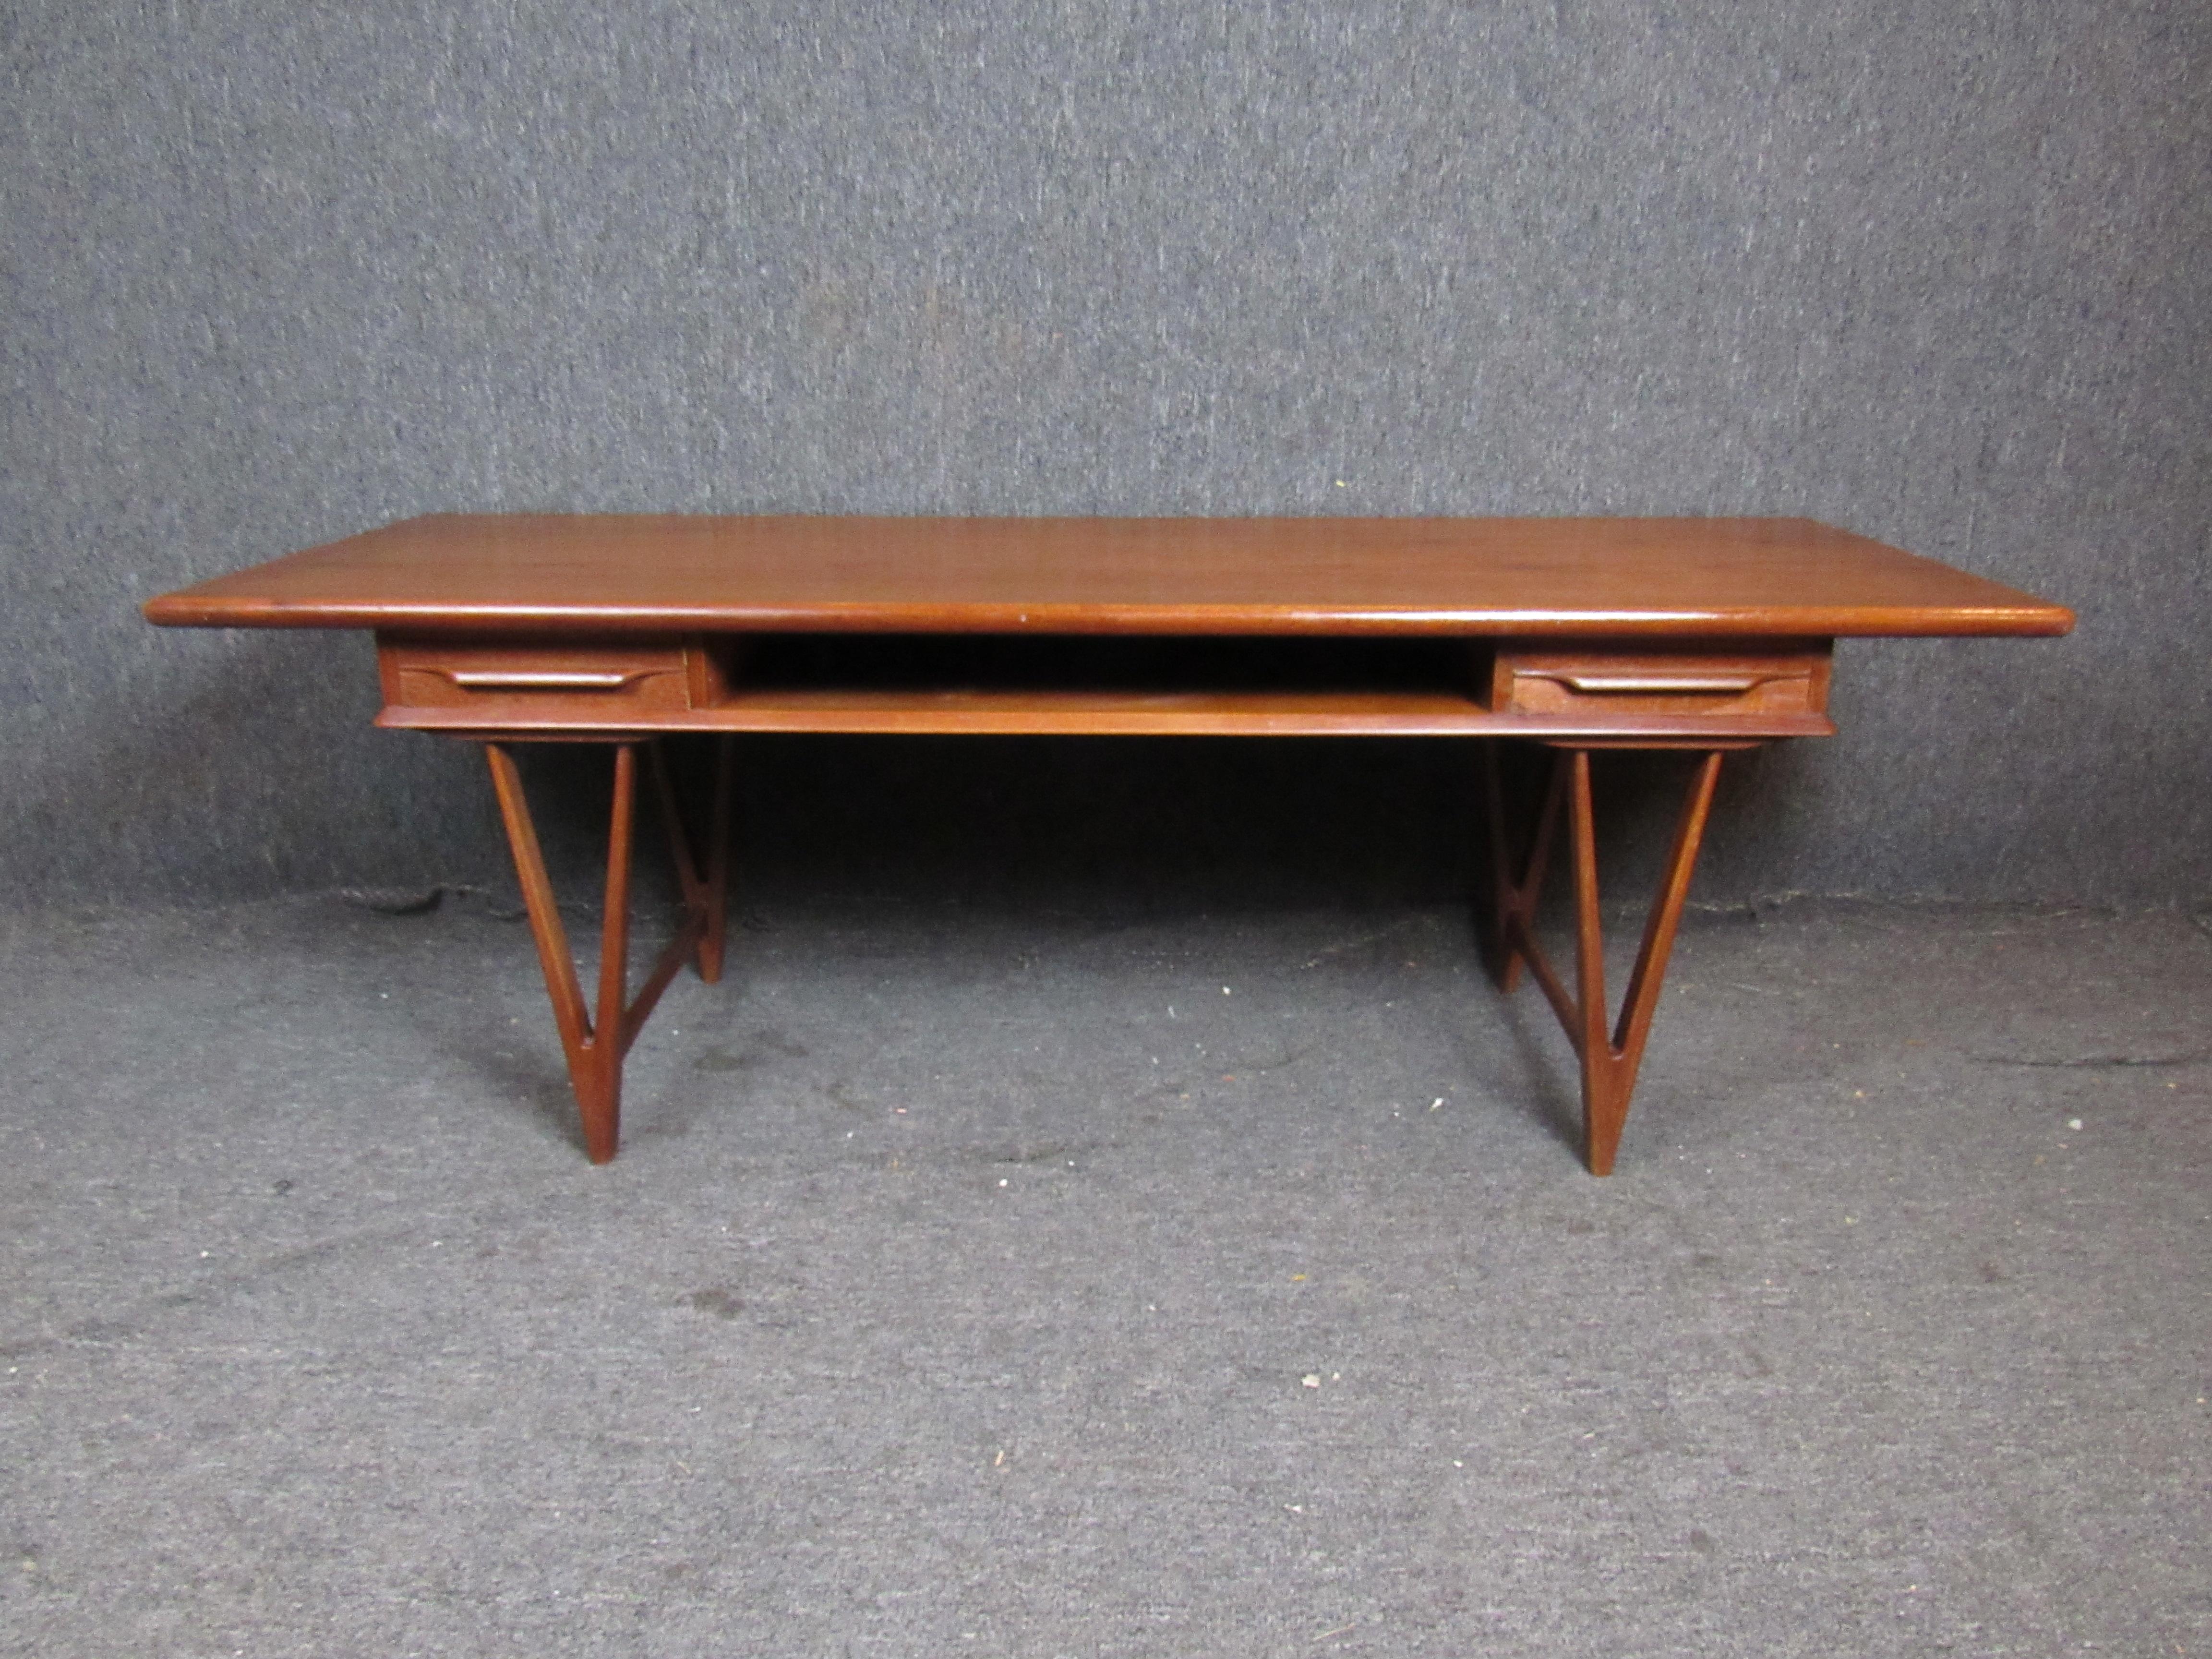 Danish made double side coffee table by E.W. Bach. Set on sleek V-shape legs, the top features a magazine shelf and two double side drawers.
Please confirm location NY or NJ